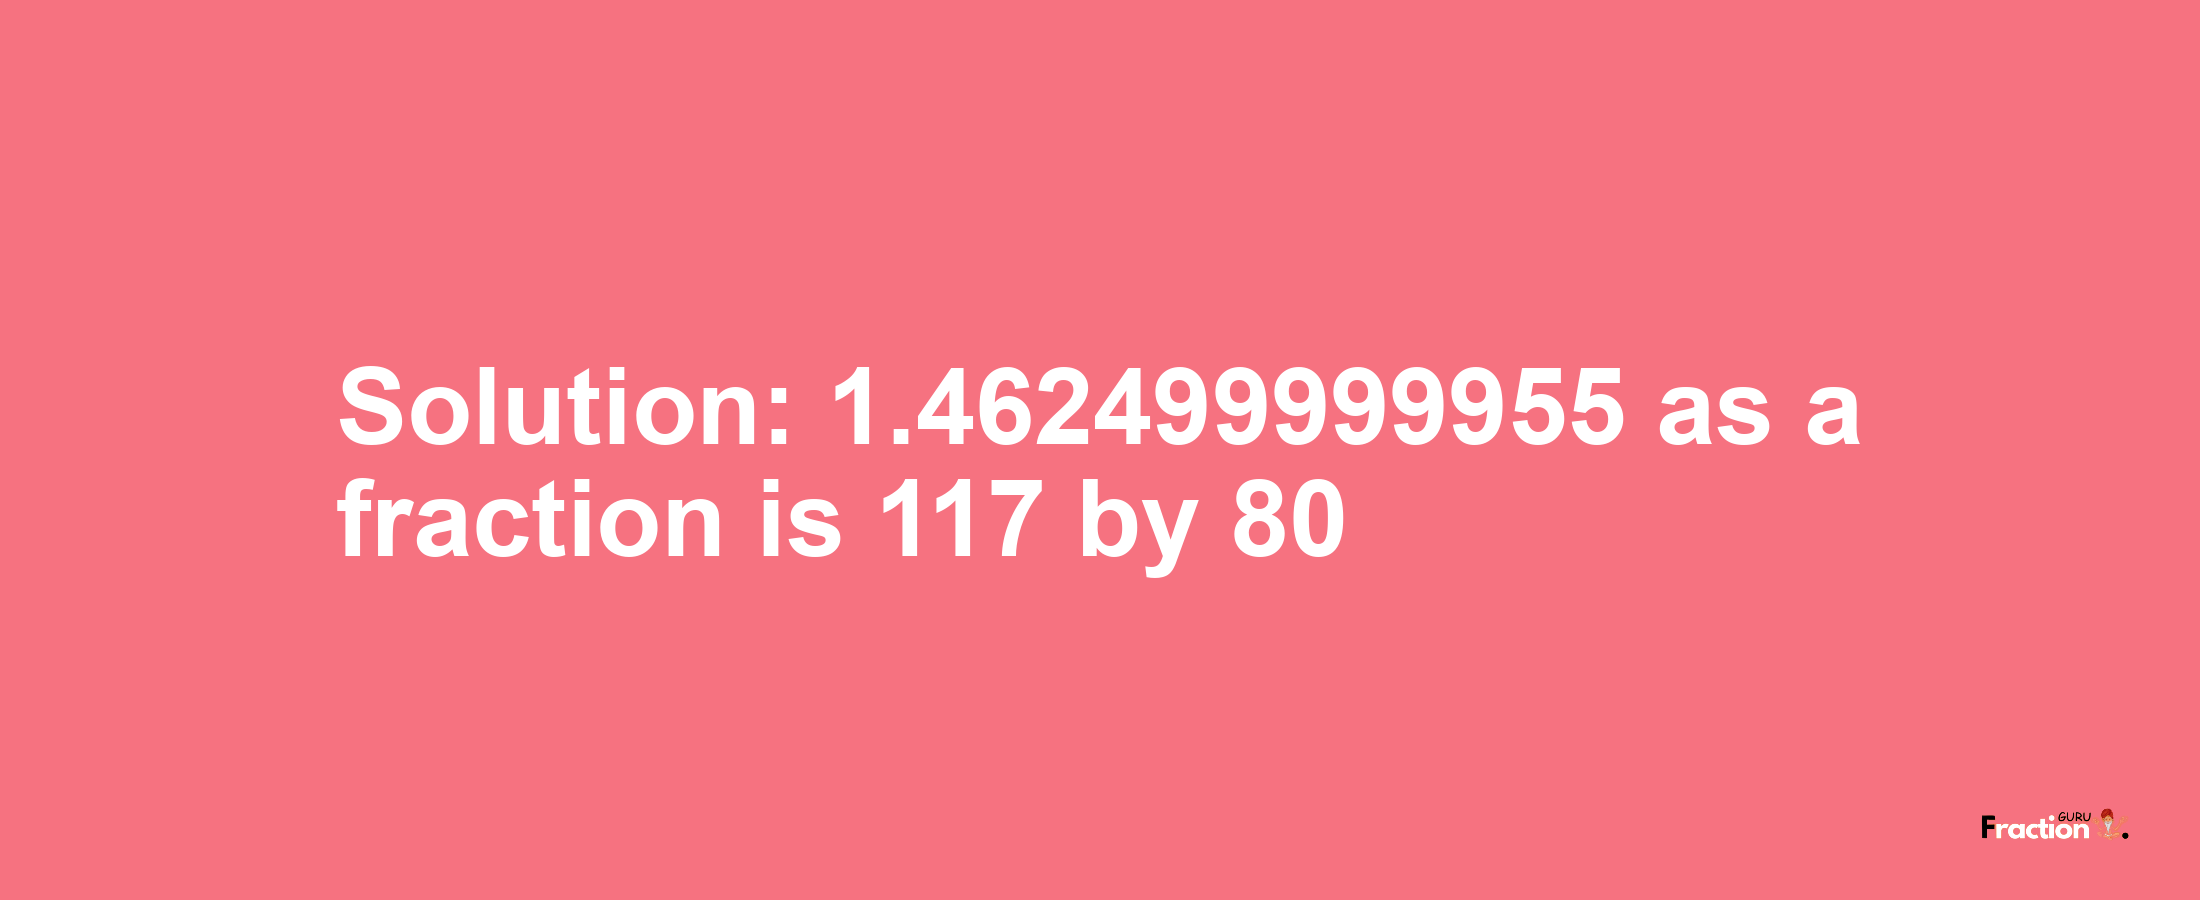 Solution:1.462499999955 as a fraction is 117/80